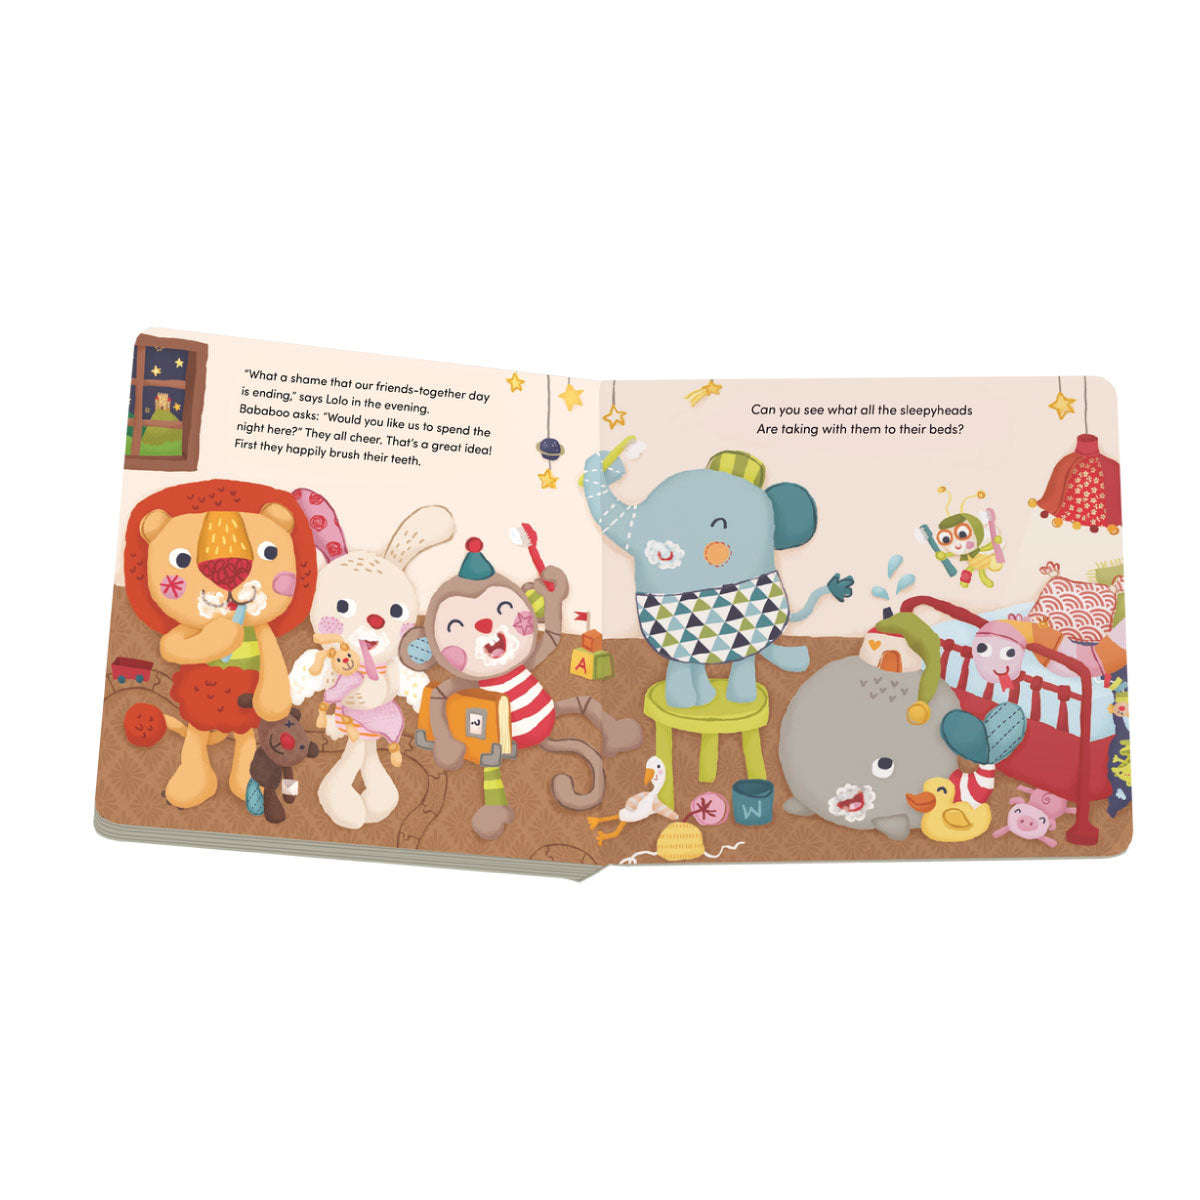 Bababoo and Friends I Love Every Day With You Board Book